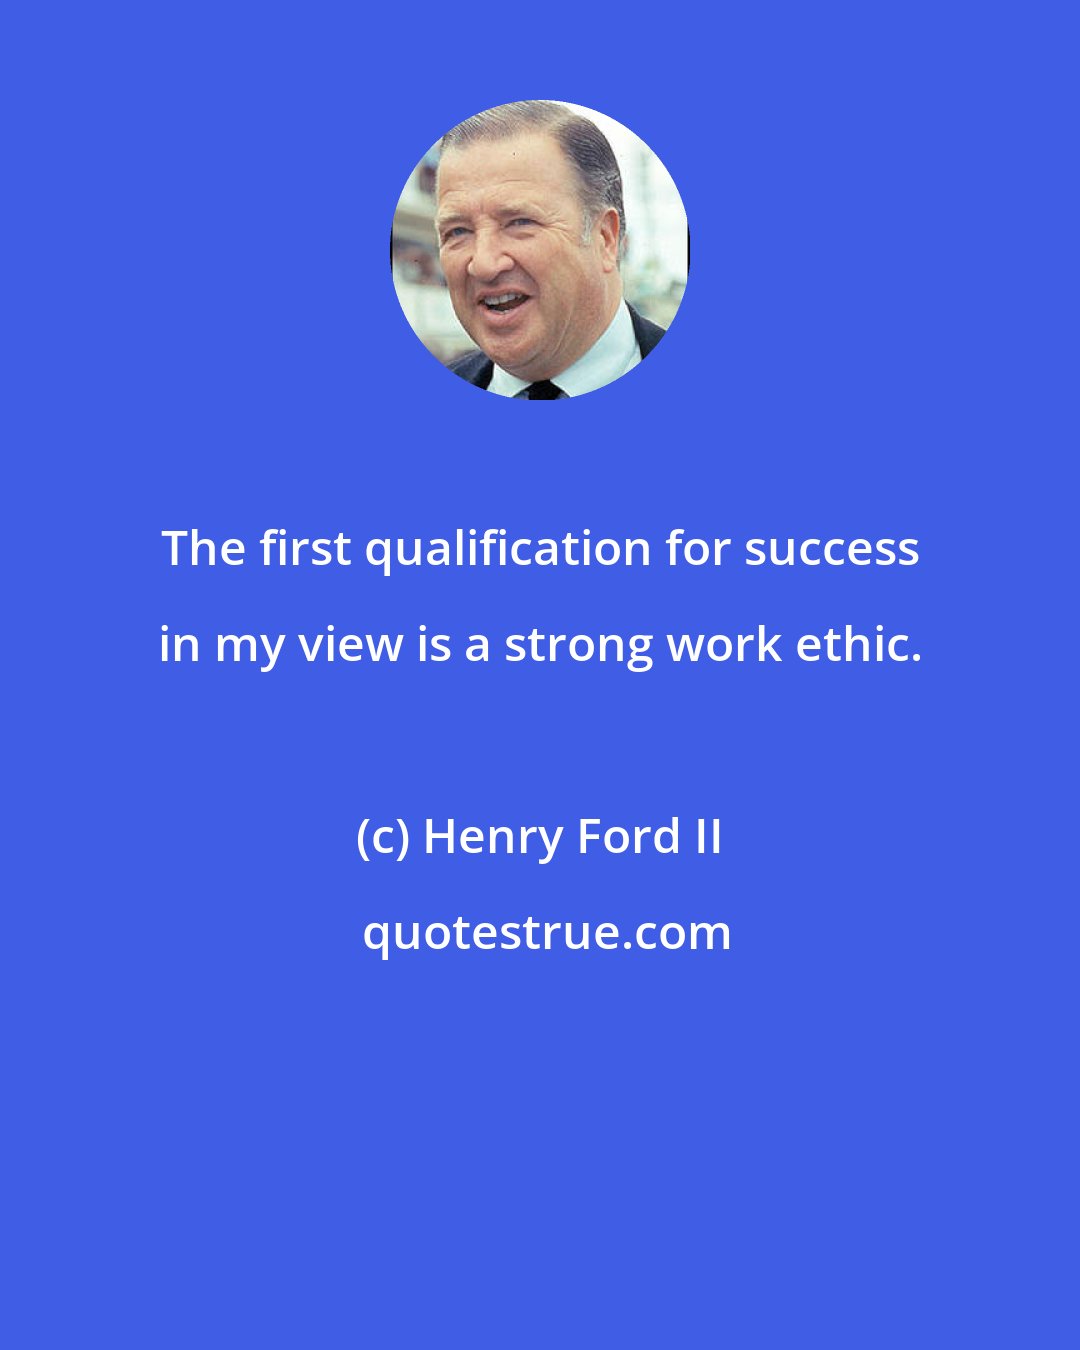 Henry Ford II: The first qualification for success in my view is a strong work ethic.